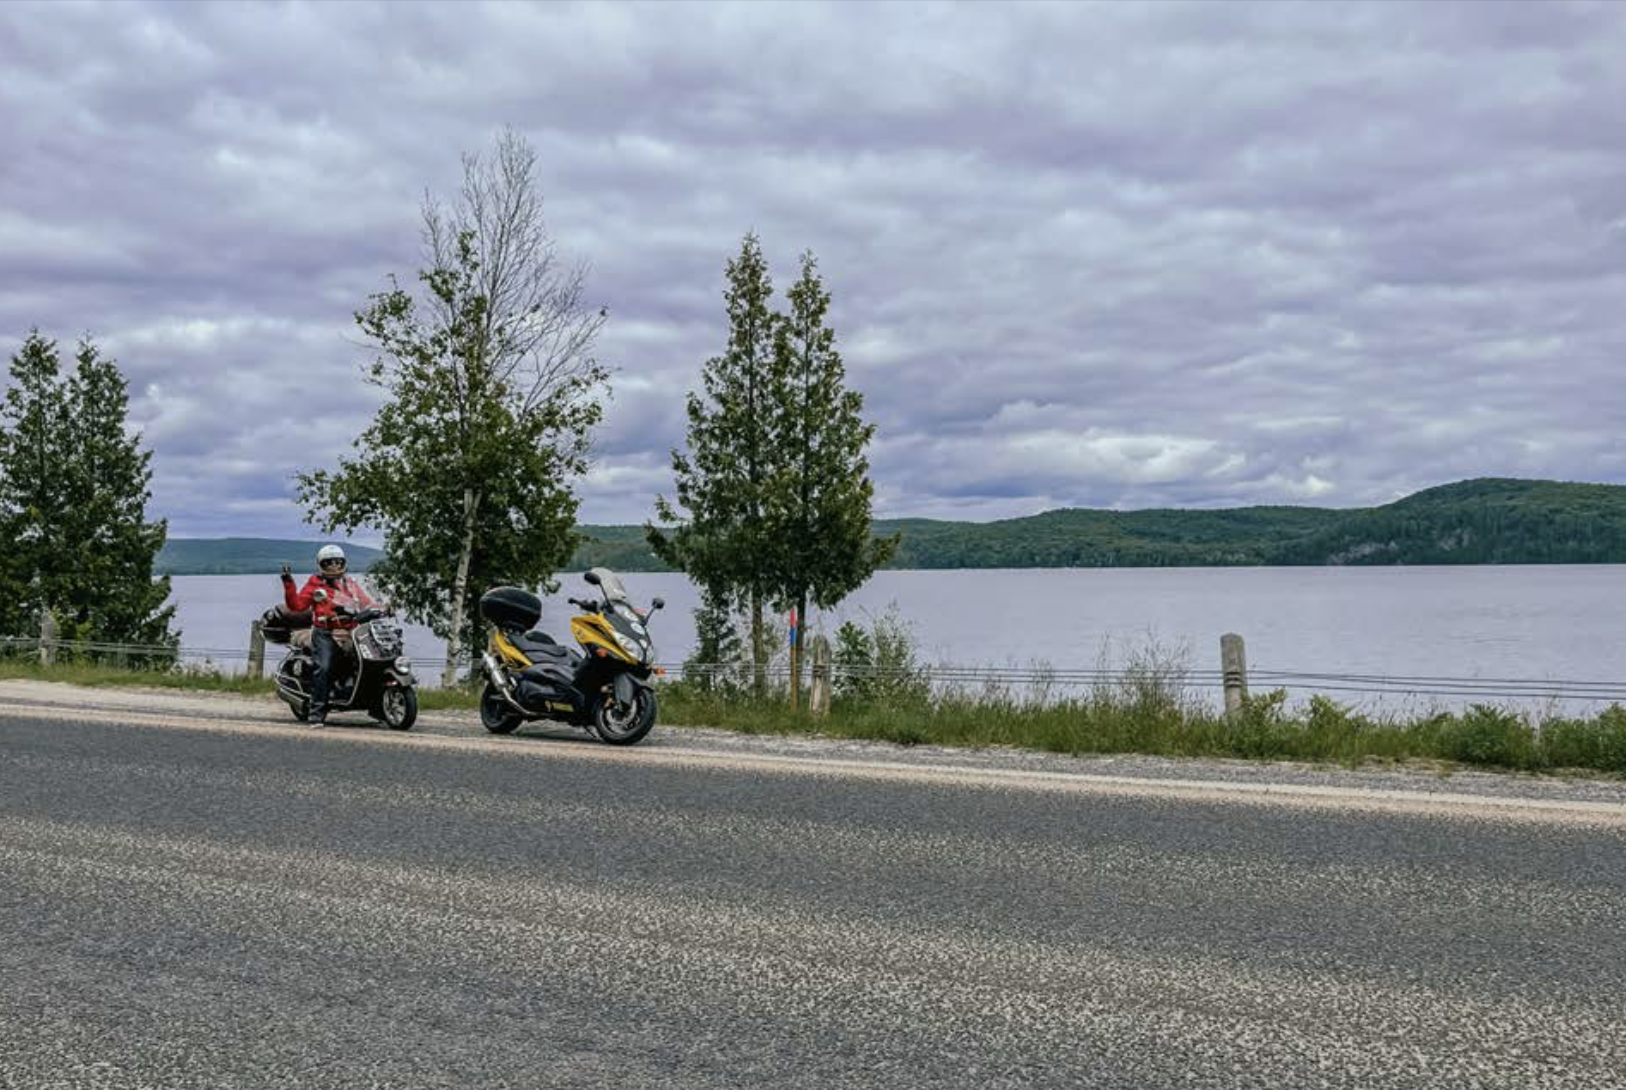 two motorcycles, one with waving rider, parked along the side of the road next to a large, calm lake surrounded by green forest, under a stormy grey sky.